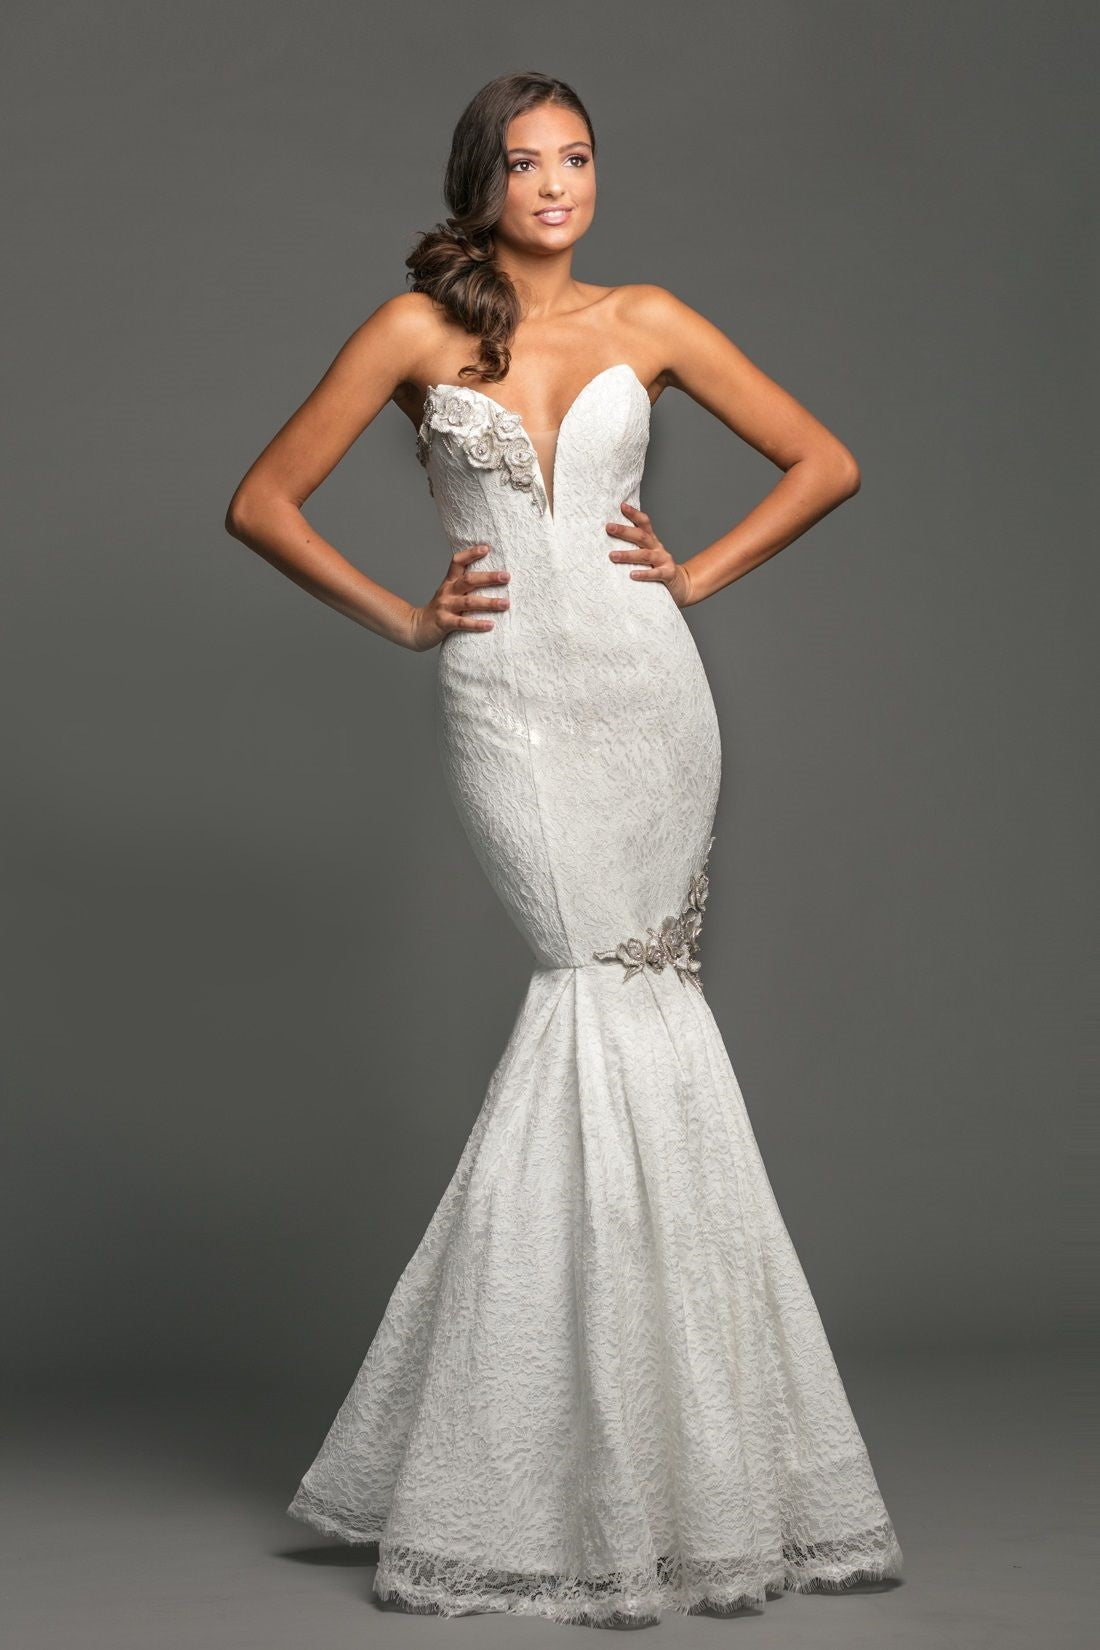 Johnathan Kayne Bridal B111 is a stunning Lace Mermaid Bridal Gown Featuring subtle pops of metallic silver in the lace to match the detailed crystal 3D floral appliques across the top & along the trumpet skirt. Lace up corset back. This would also make a stunning Prom or Pageant Dress!  Available Size: 6, 14  Available Color: Ivory